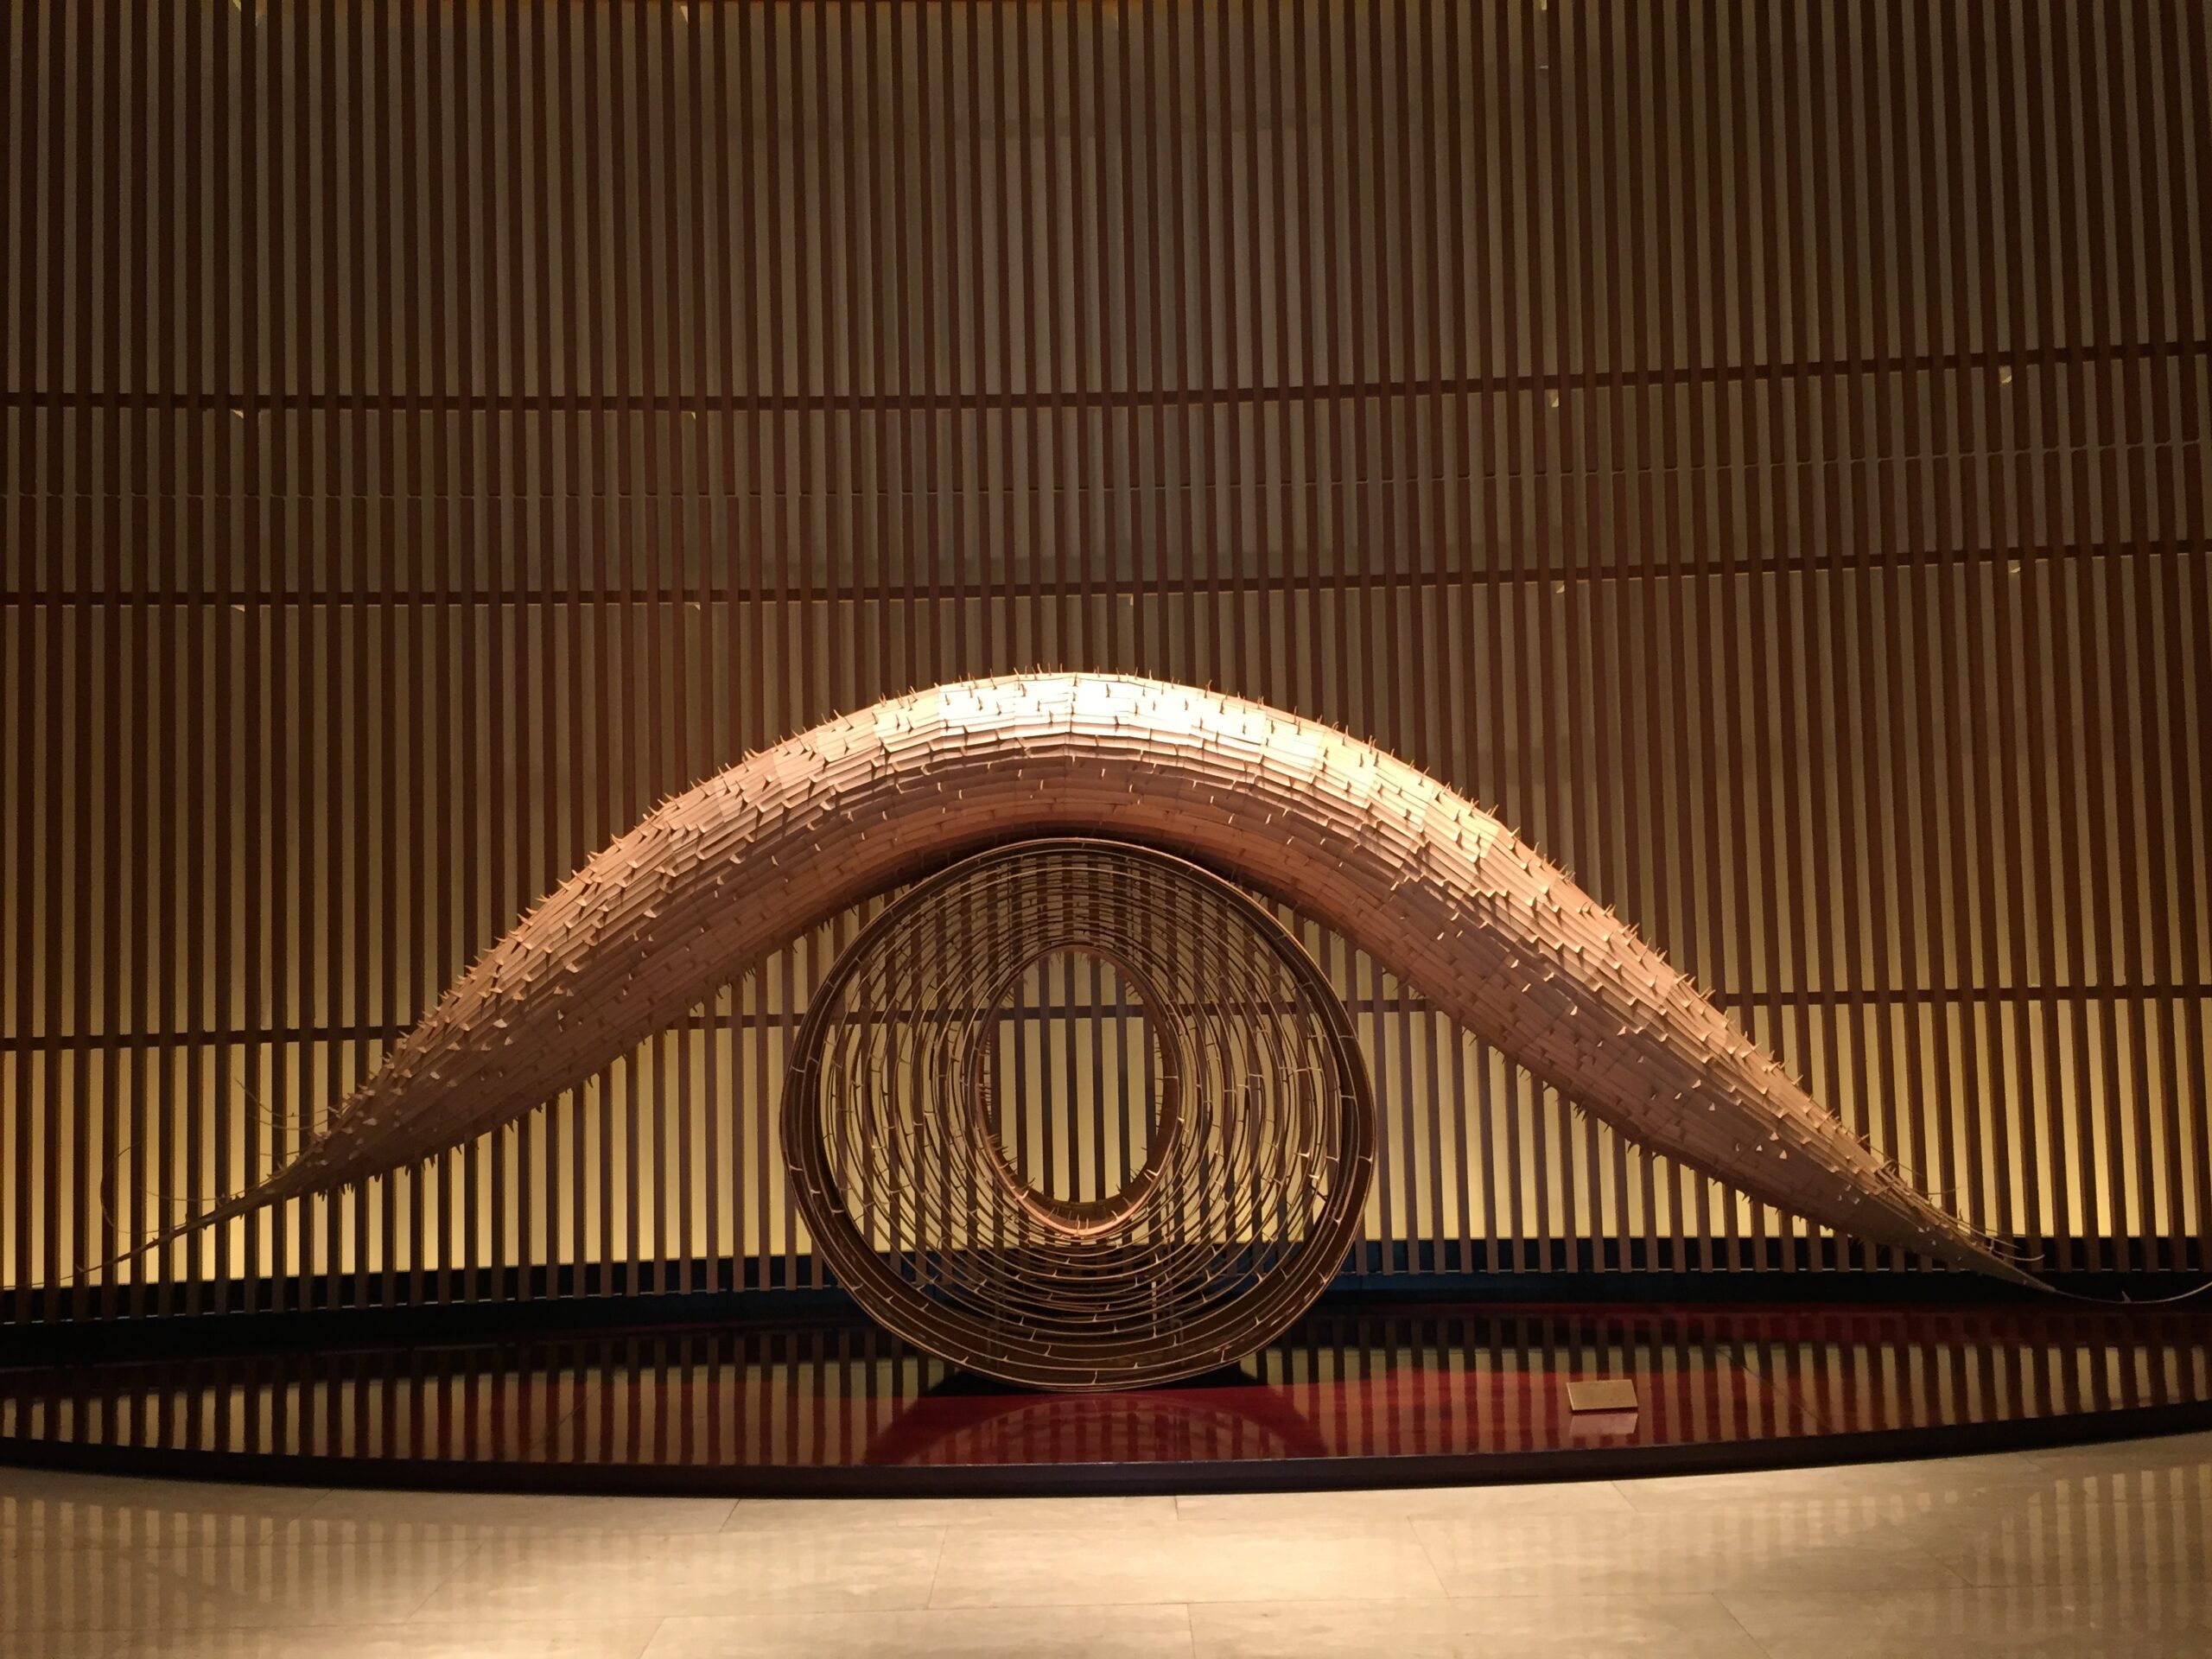 a sculpture of a curved object